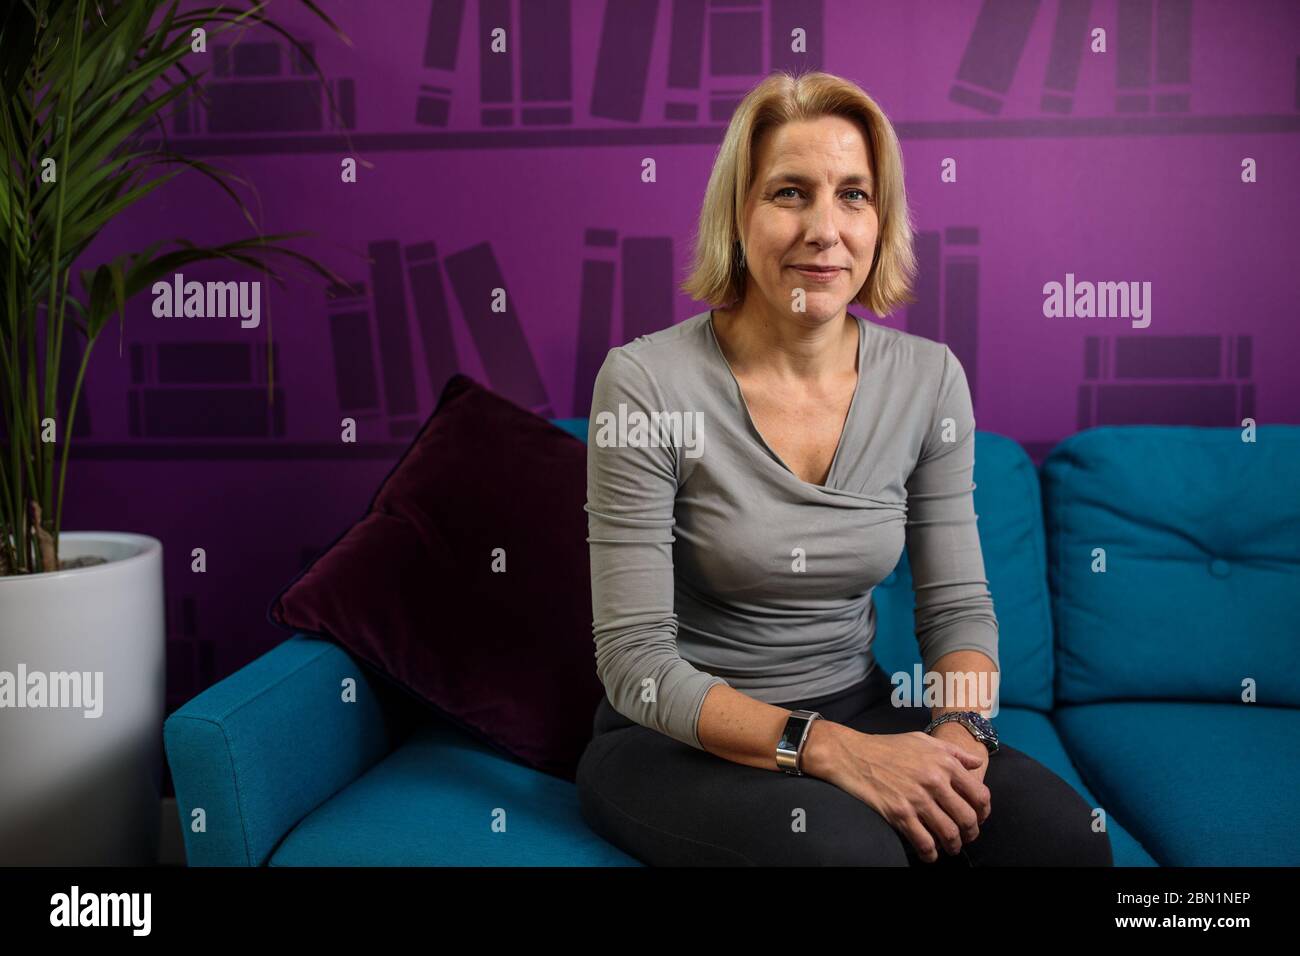 CEO of the British Retail Consortium (BRC) Helen Dickinson OBE poses for a portrait at BRC offices in London Bridge, London, England on February 7, 2019. Stock Photo